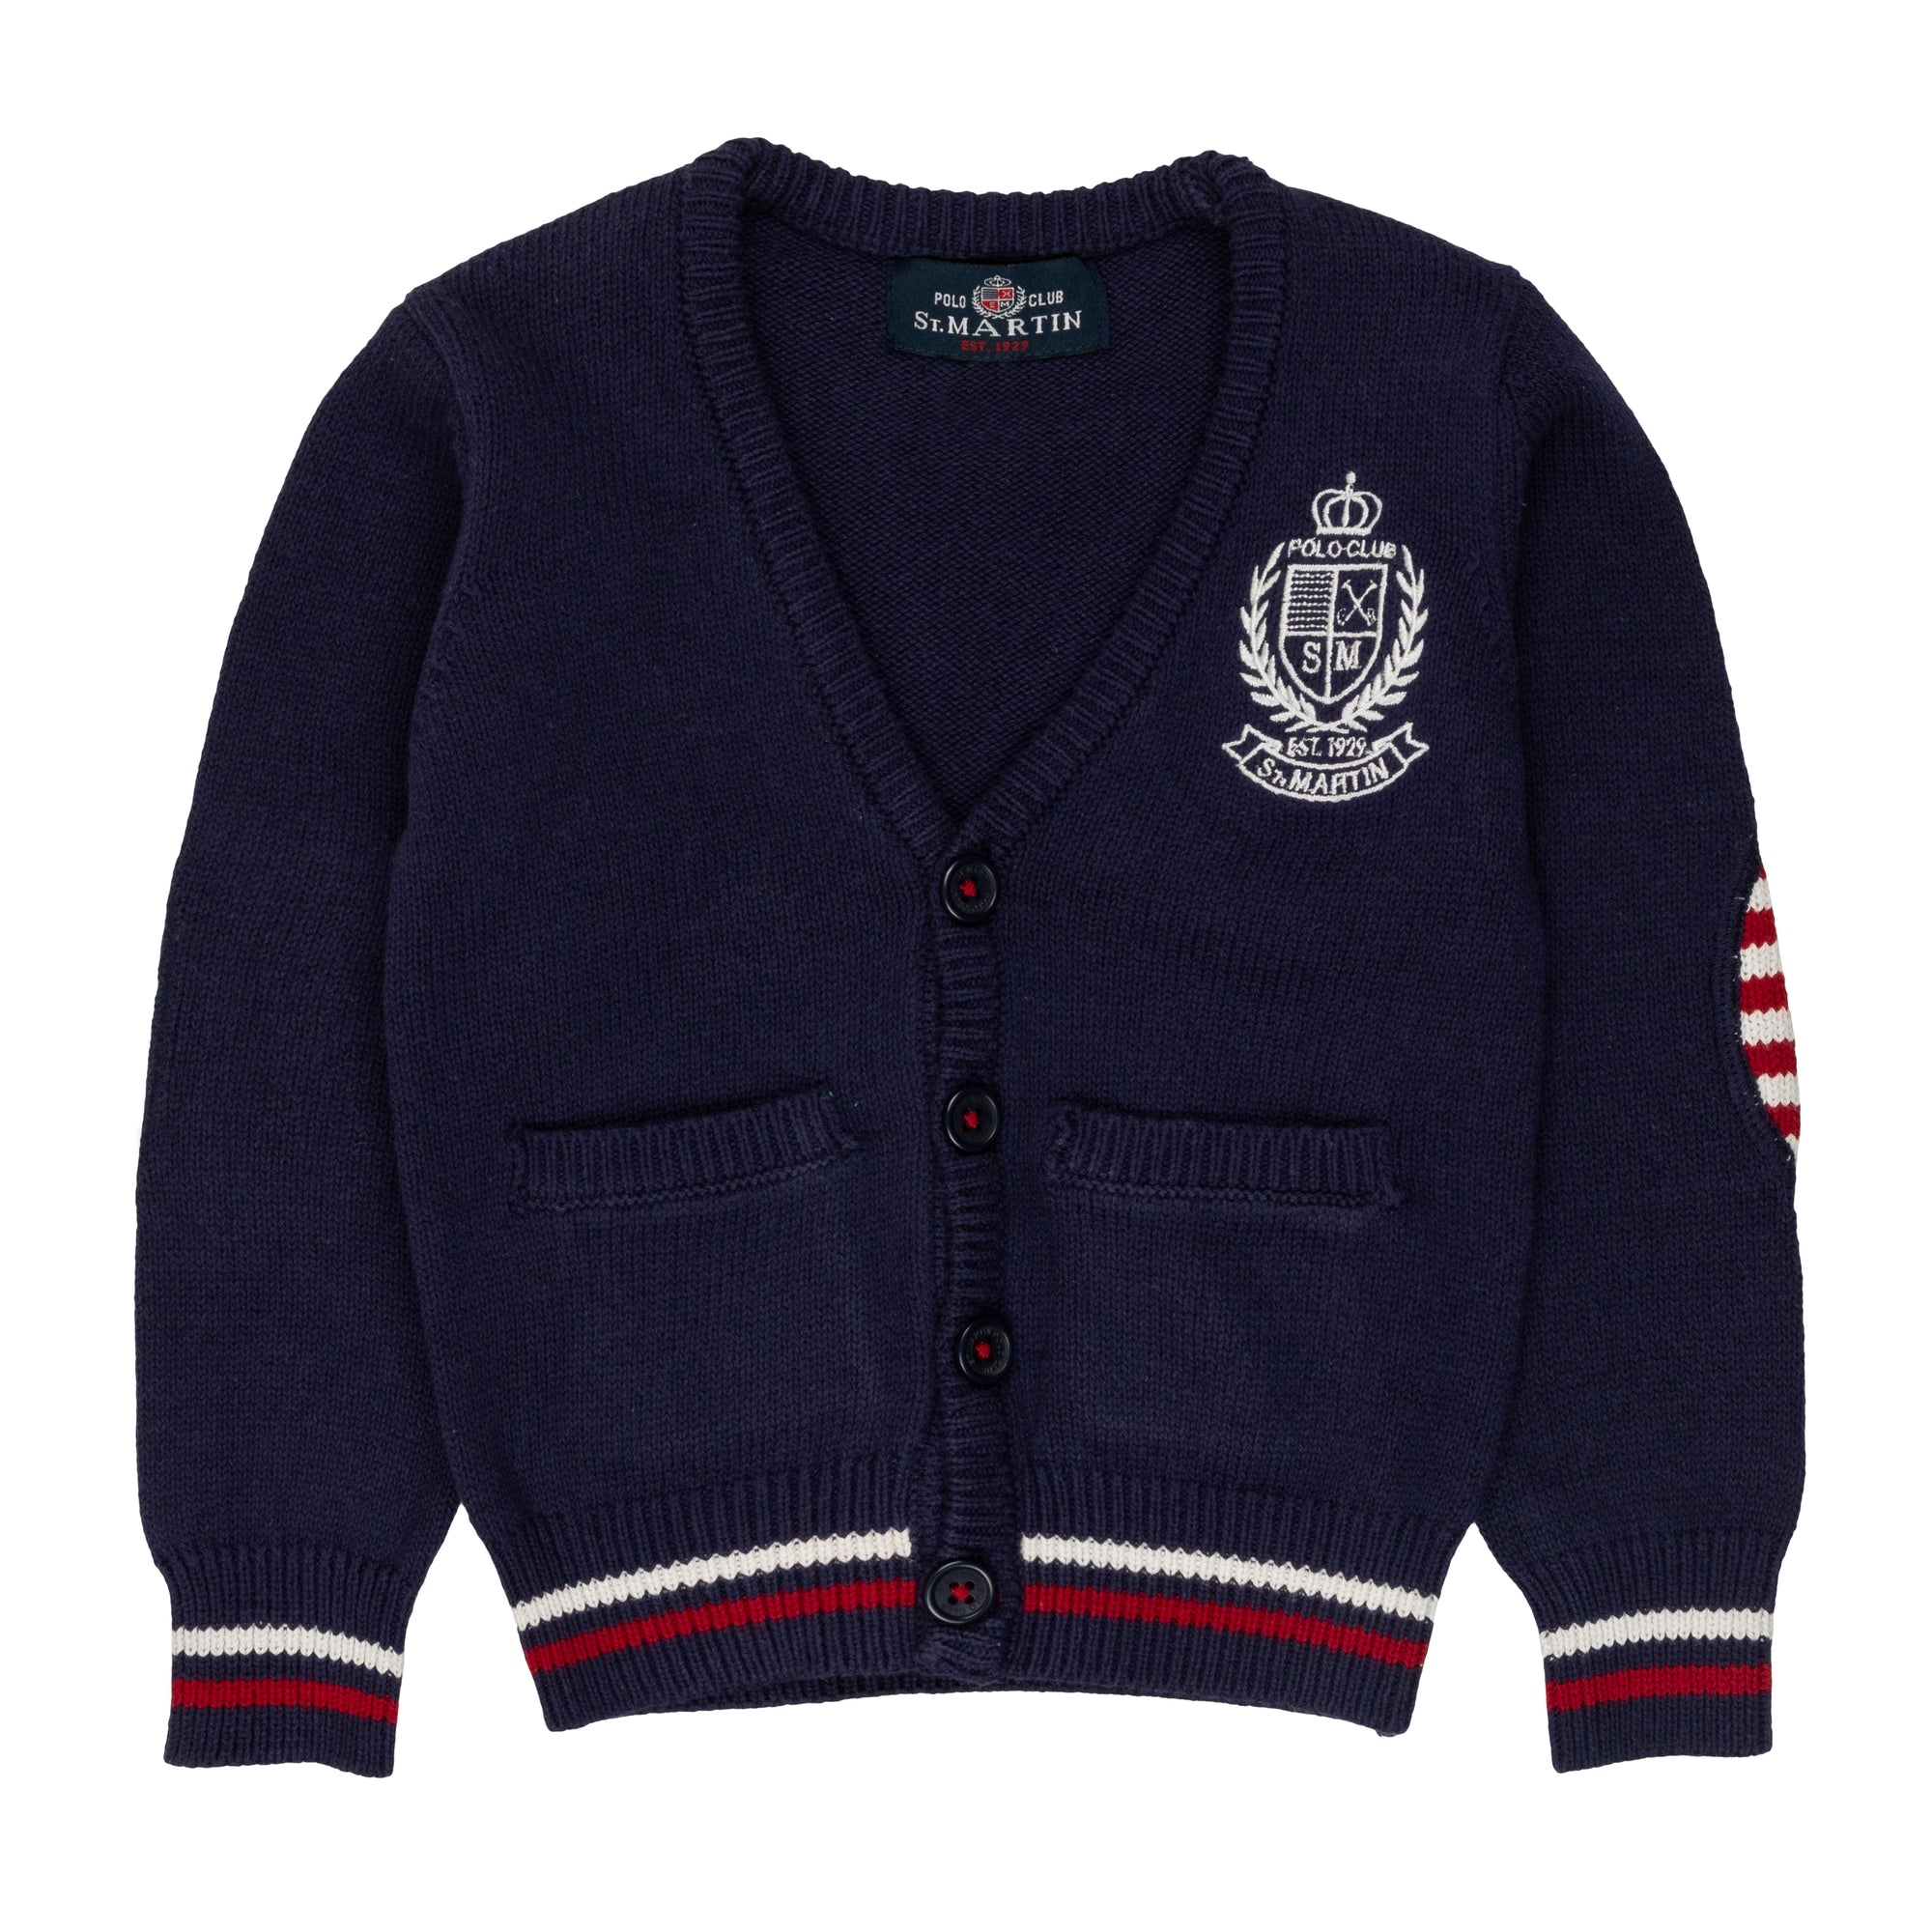 7 gauge cardigan with patches